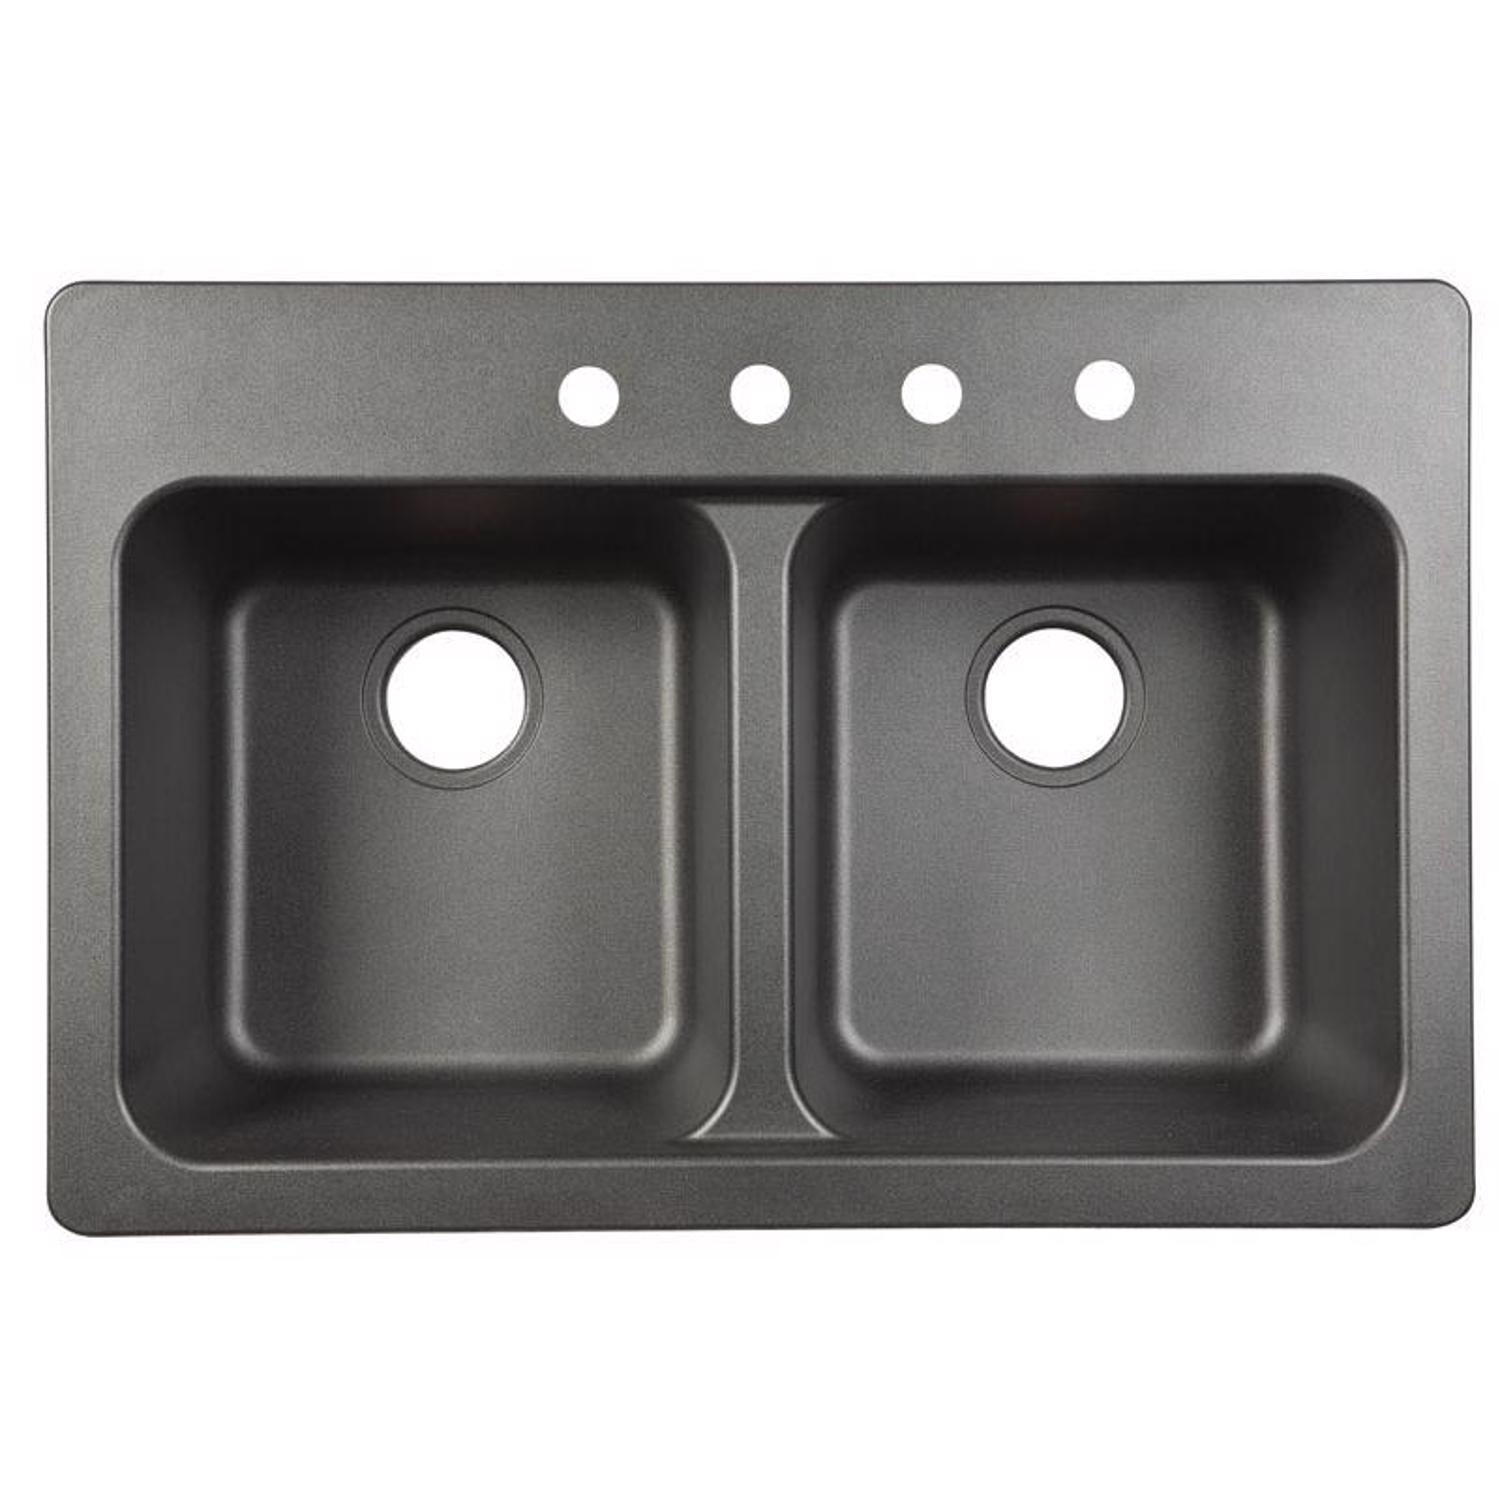 Photos - Kitchen Sink Franke Tectonite Dual Mount 33 in. W X 22 in. L Double Bowl  B 